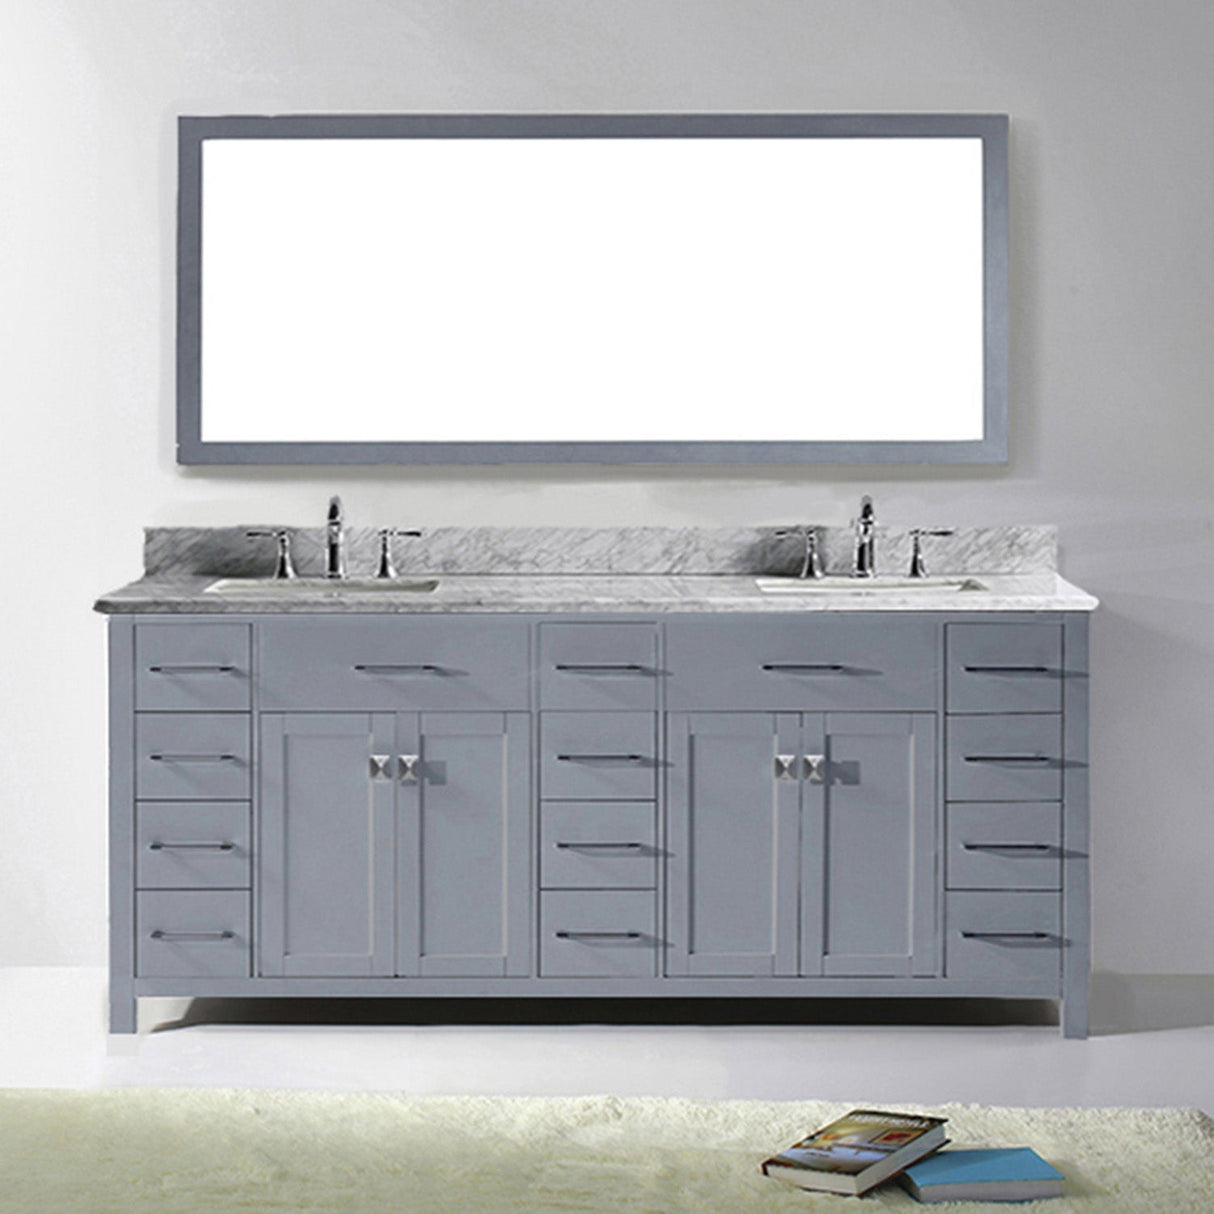 Virtu USA Caroline Parkway 78" Double Bath Vanity with White Marble Top and Square Sinks with Brushed Nickel Faucets with Matching Mirror